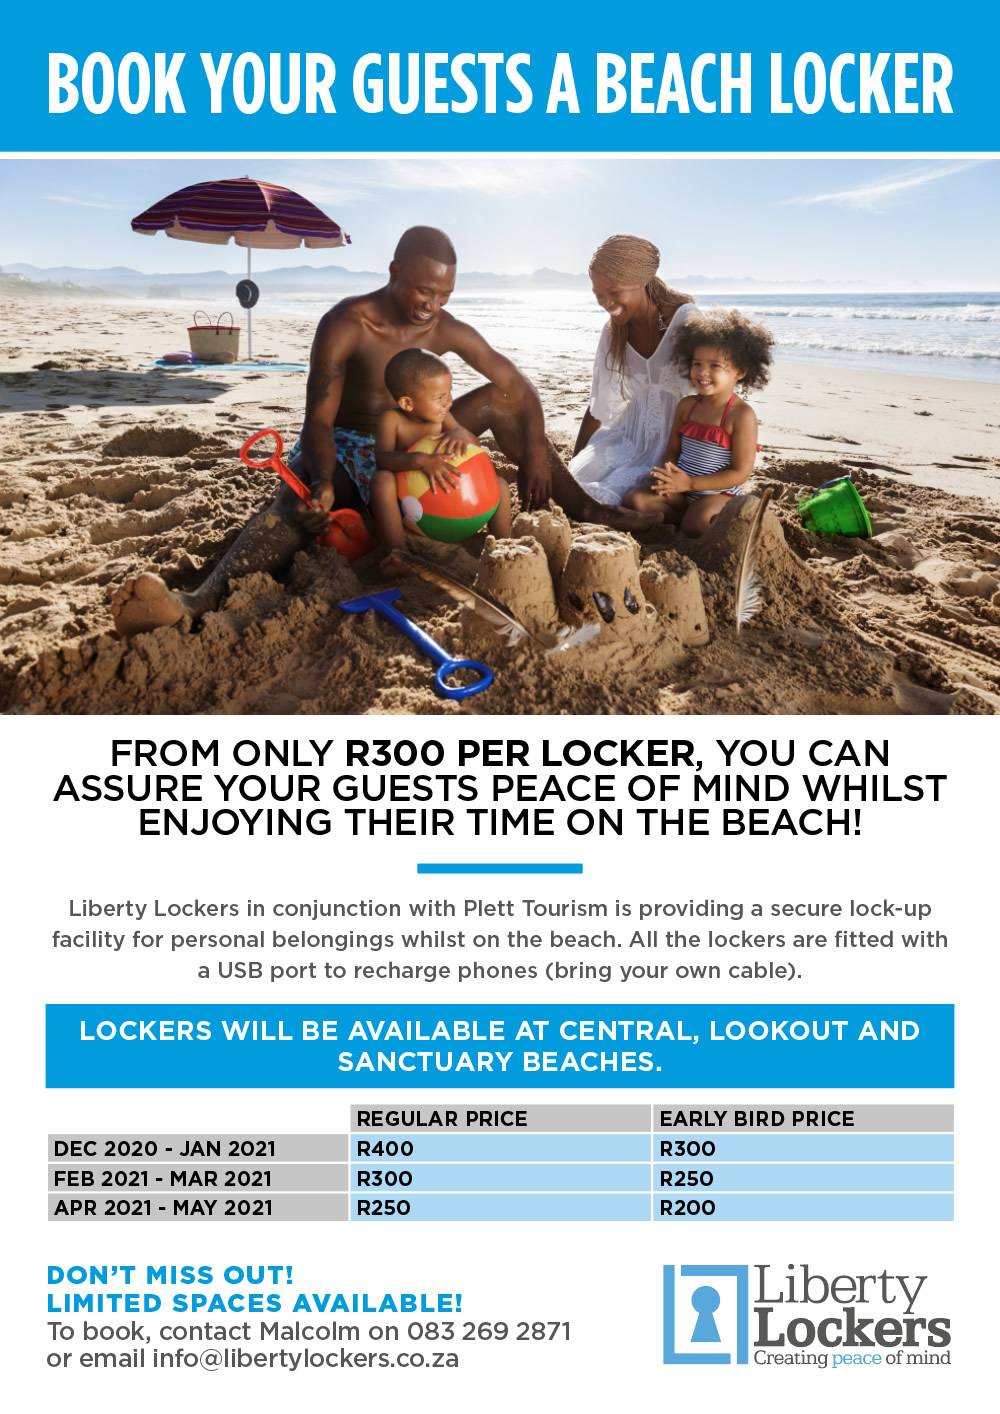 book a beach locker for your guests